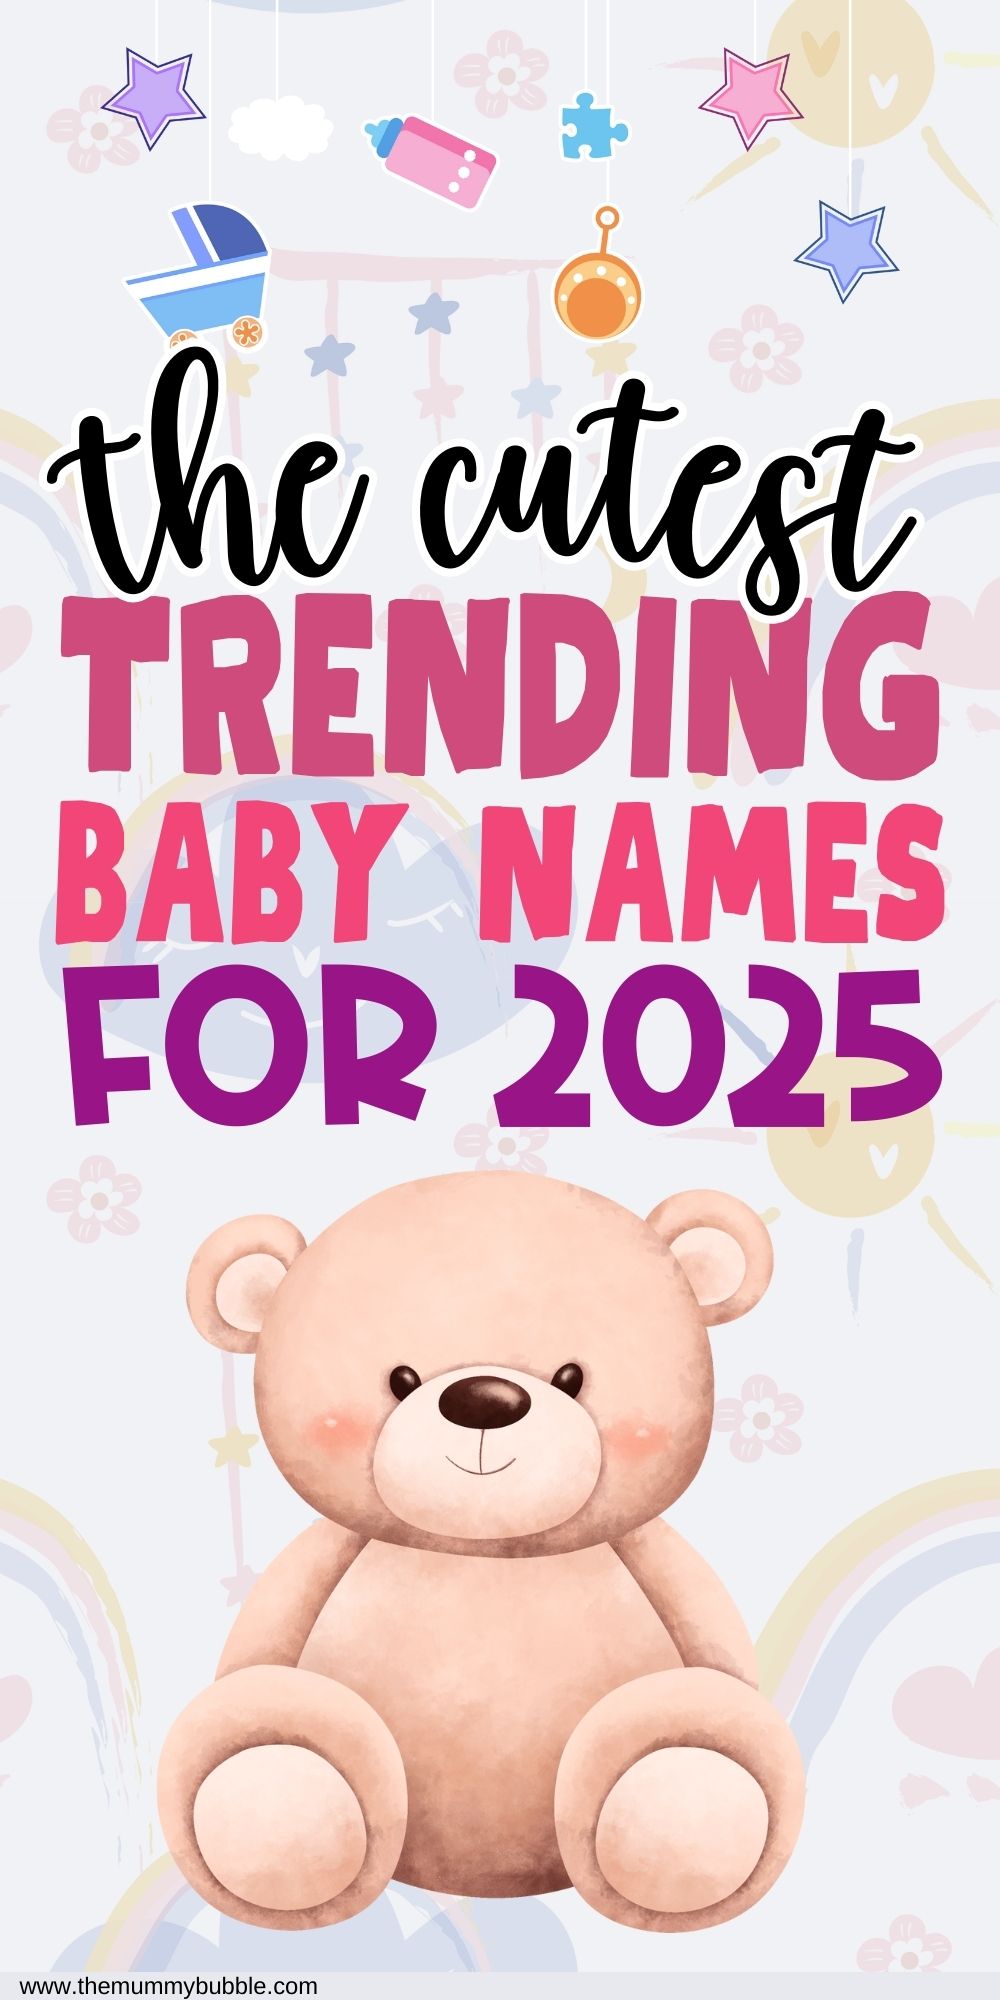 Baby name trends for 2025